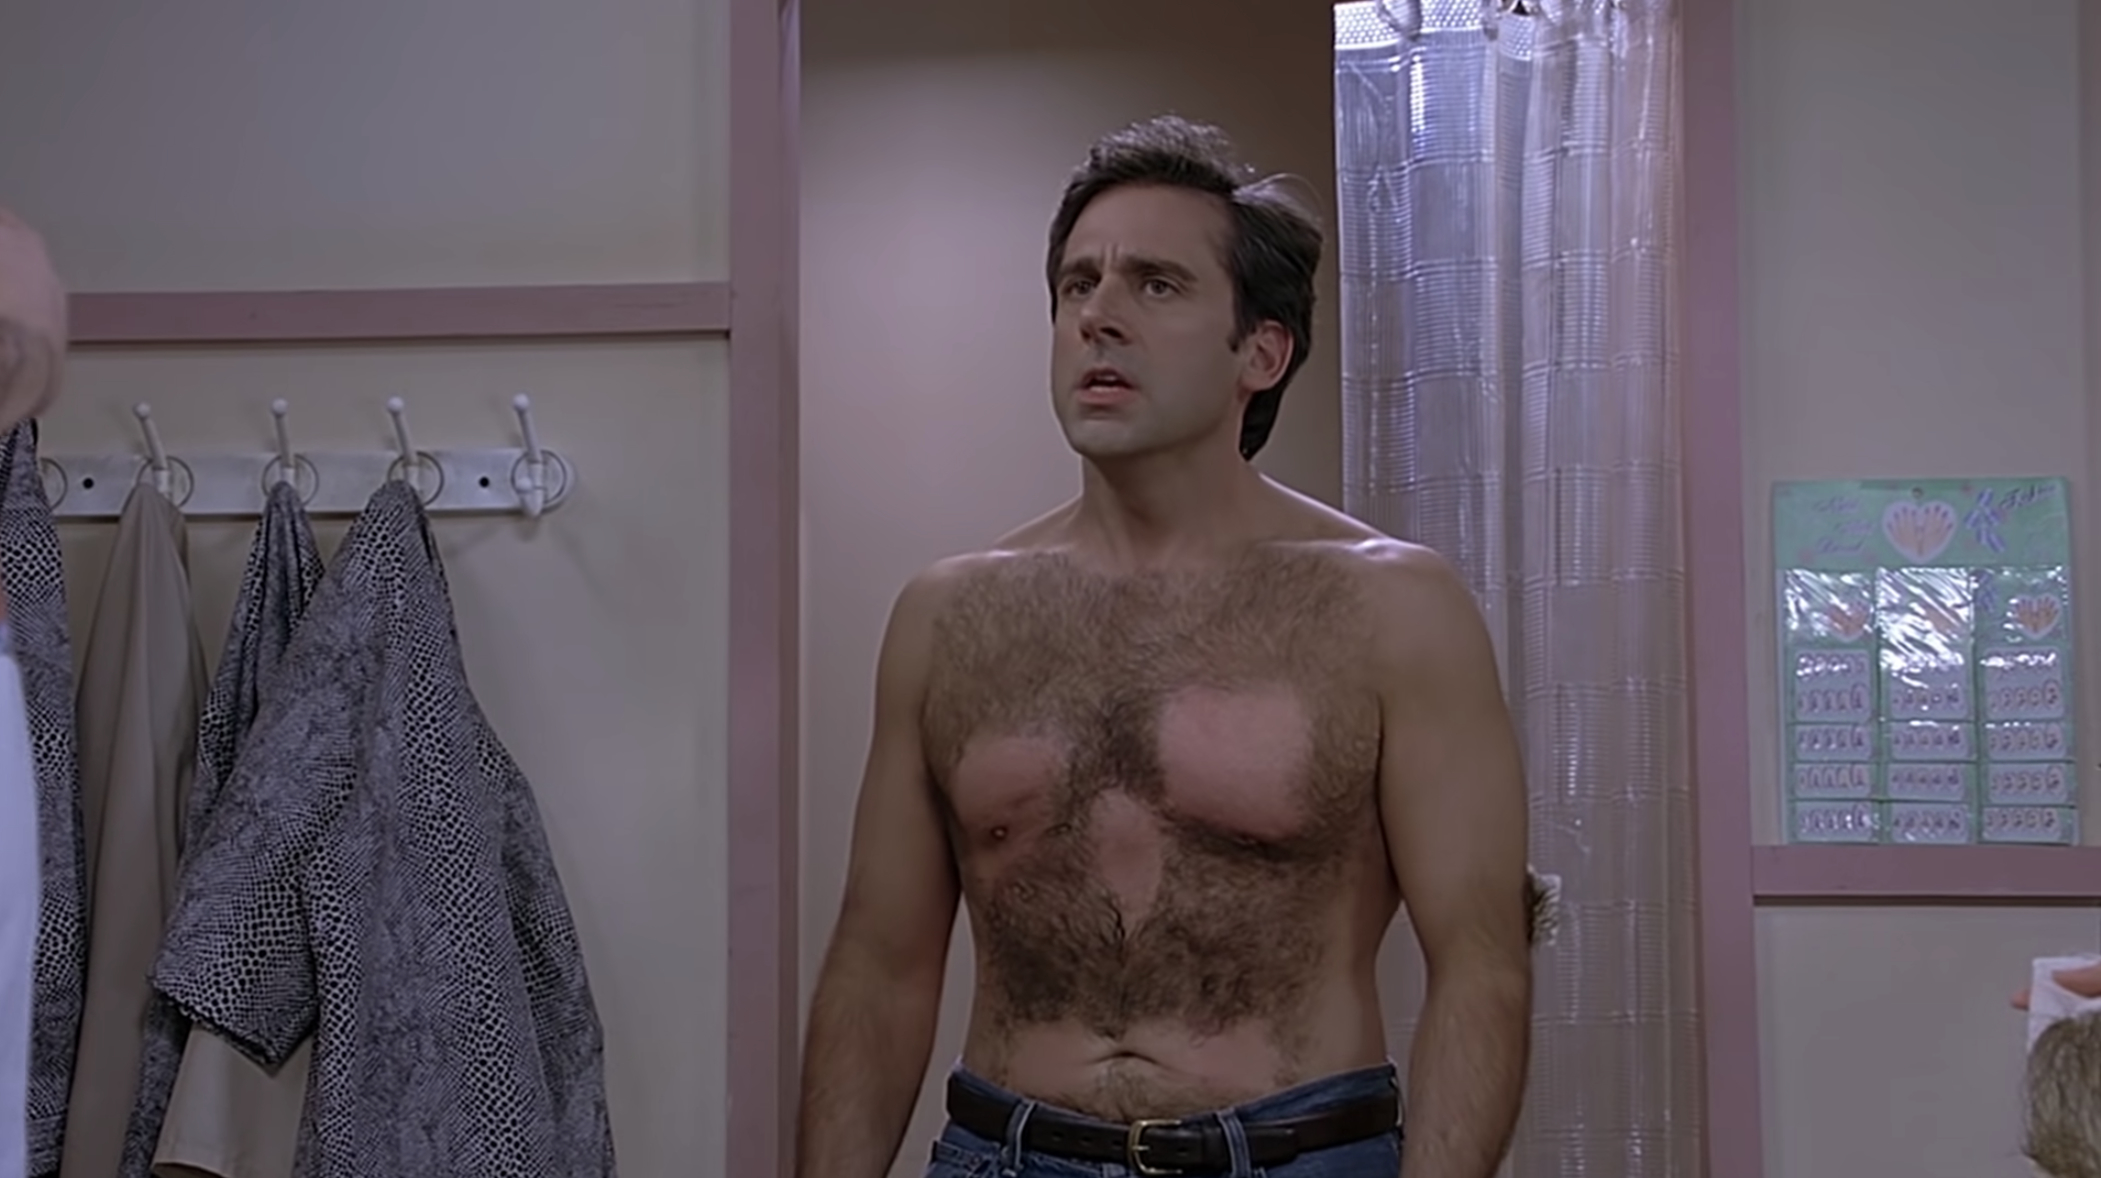 steve carell after getting his chest partially waxed in the 40 year old virgin